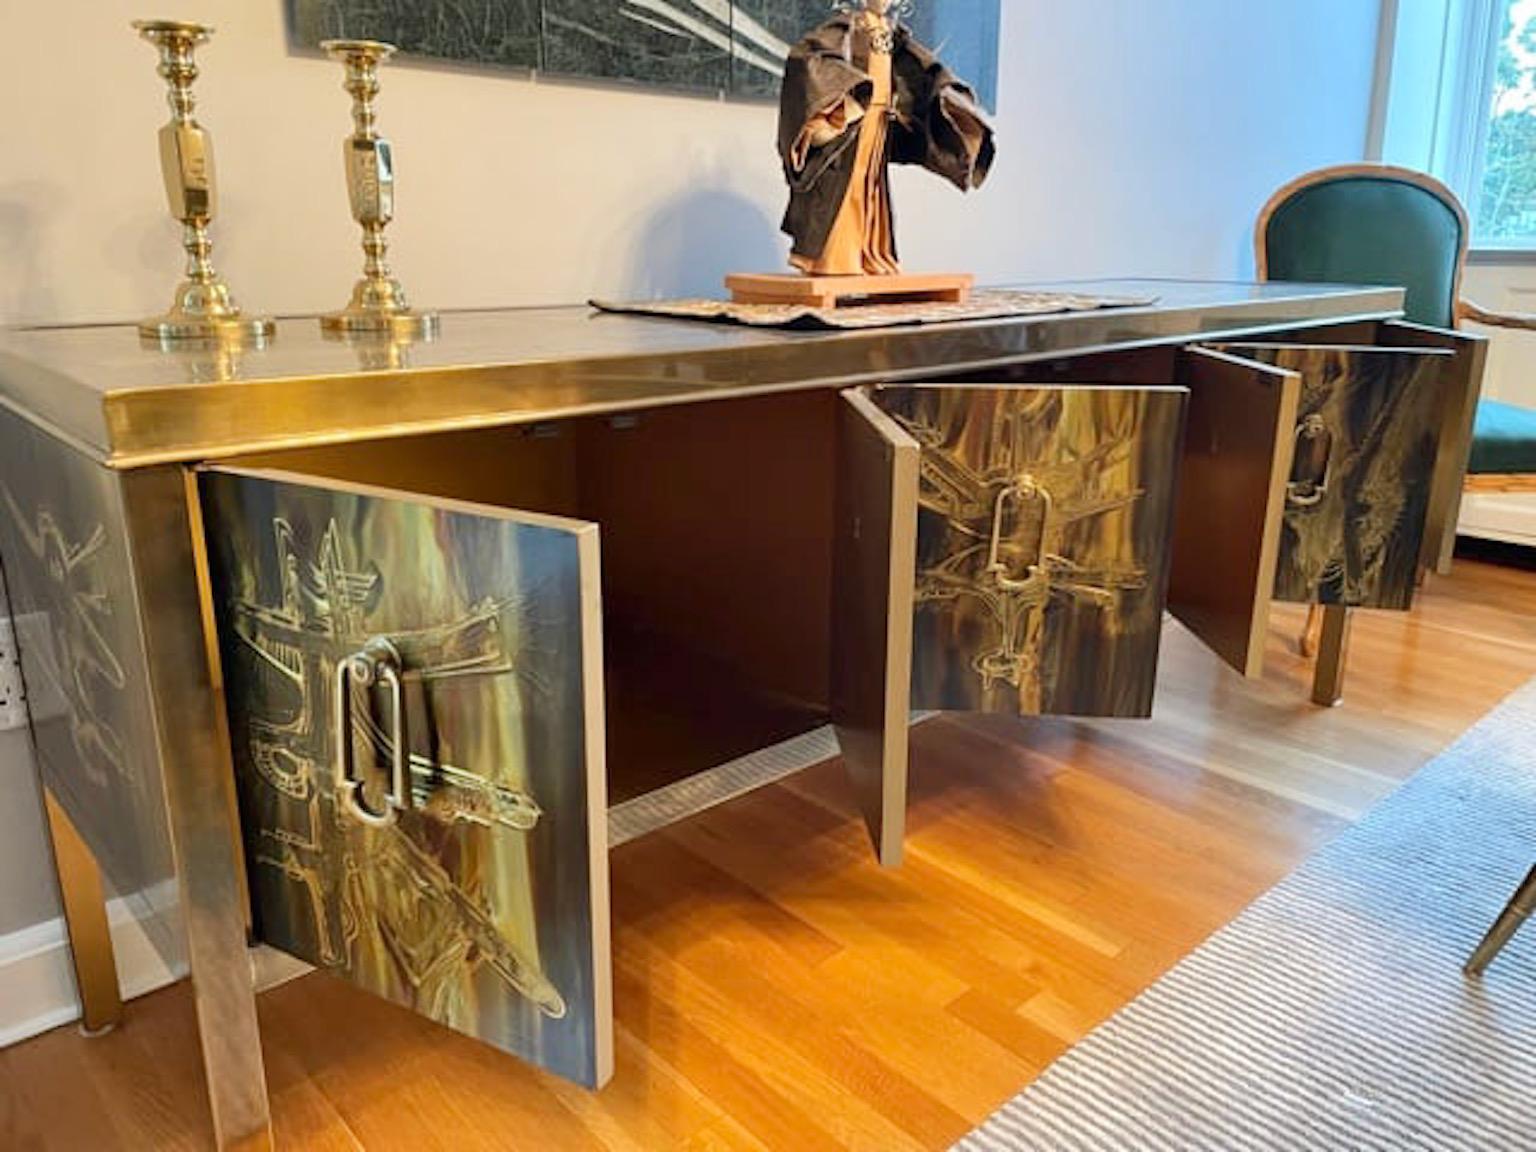 Sophisticated artistic metal craft sideboard credenza by Bernard Rohne for Mastercraft circa 1974 with a most beautiful patina reminiscent of the work of Philip & Kelvin Laverne. Patinated brass trim and legs purposely frame Rohne's art. Six doors